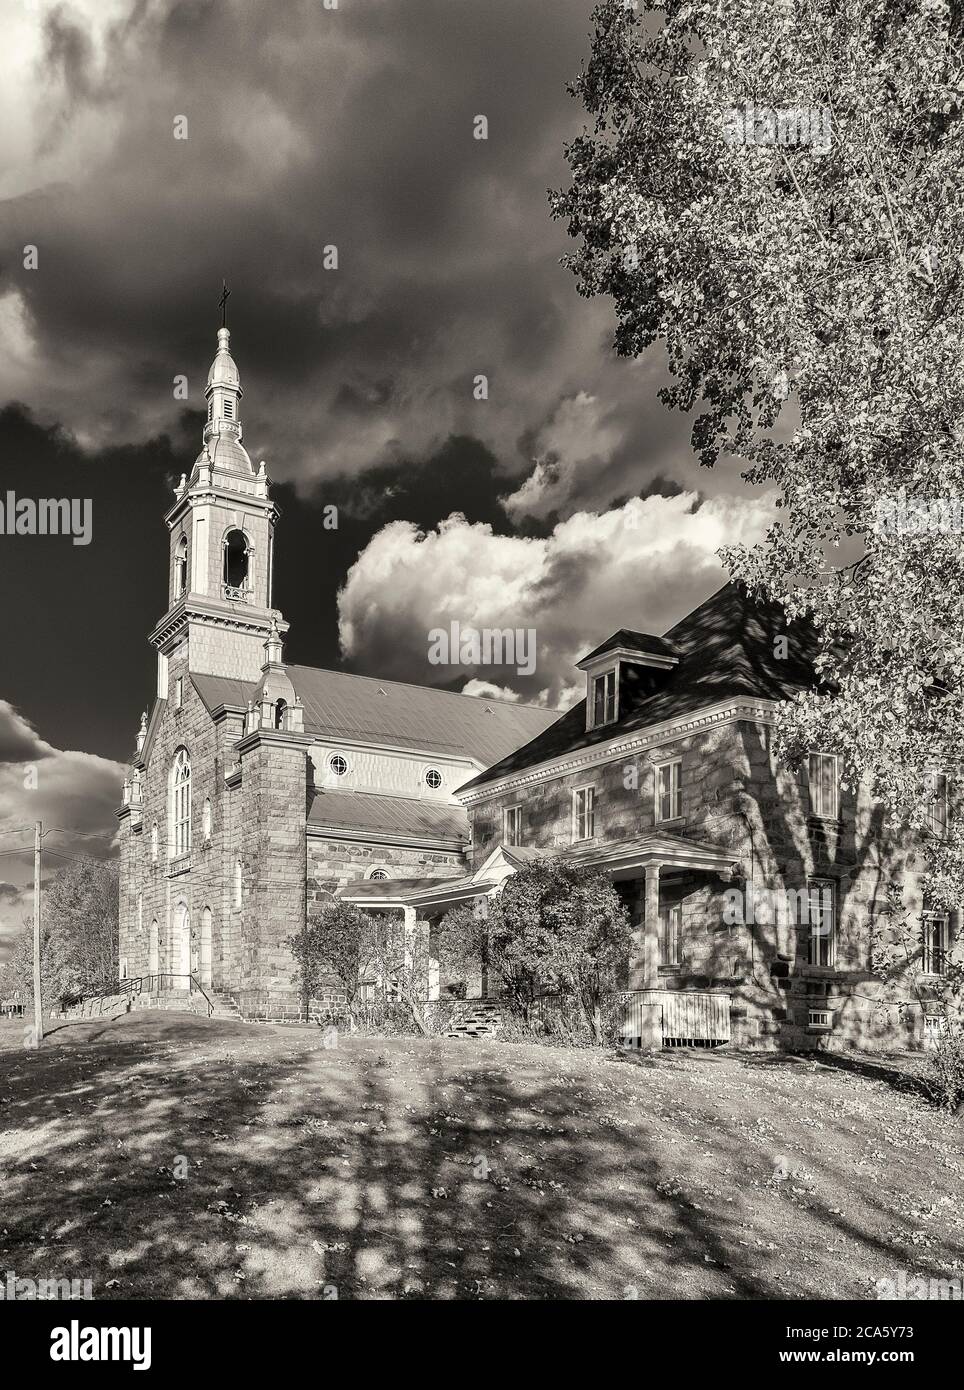 View of hose and church, North Hatley, Eastern Townships, Estrie, Quebec Provence, Canada Stock Photo